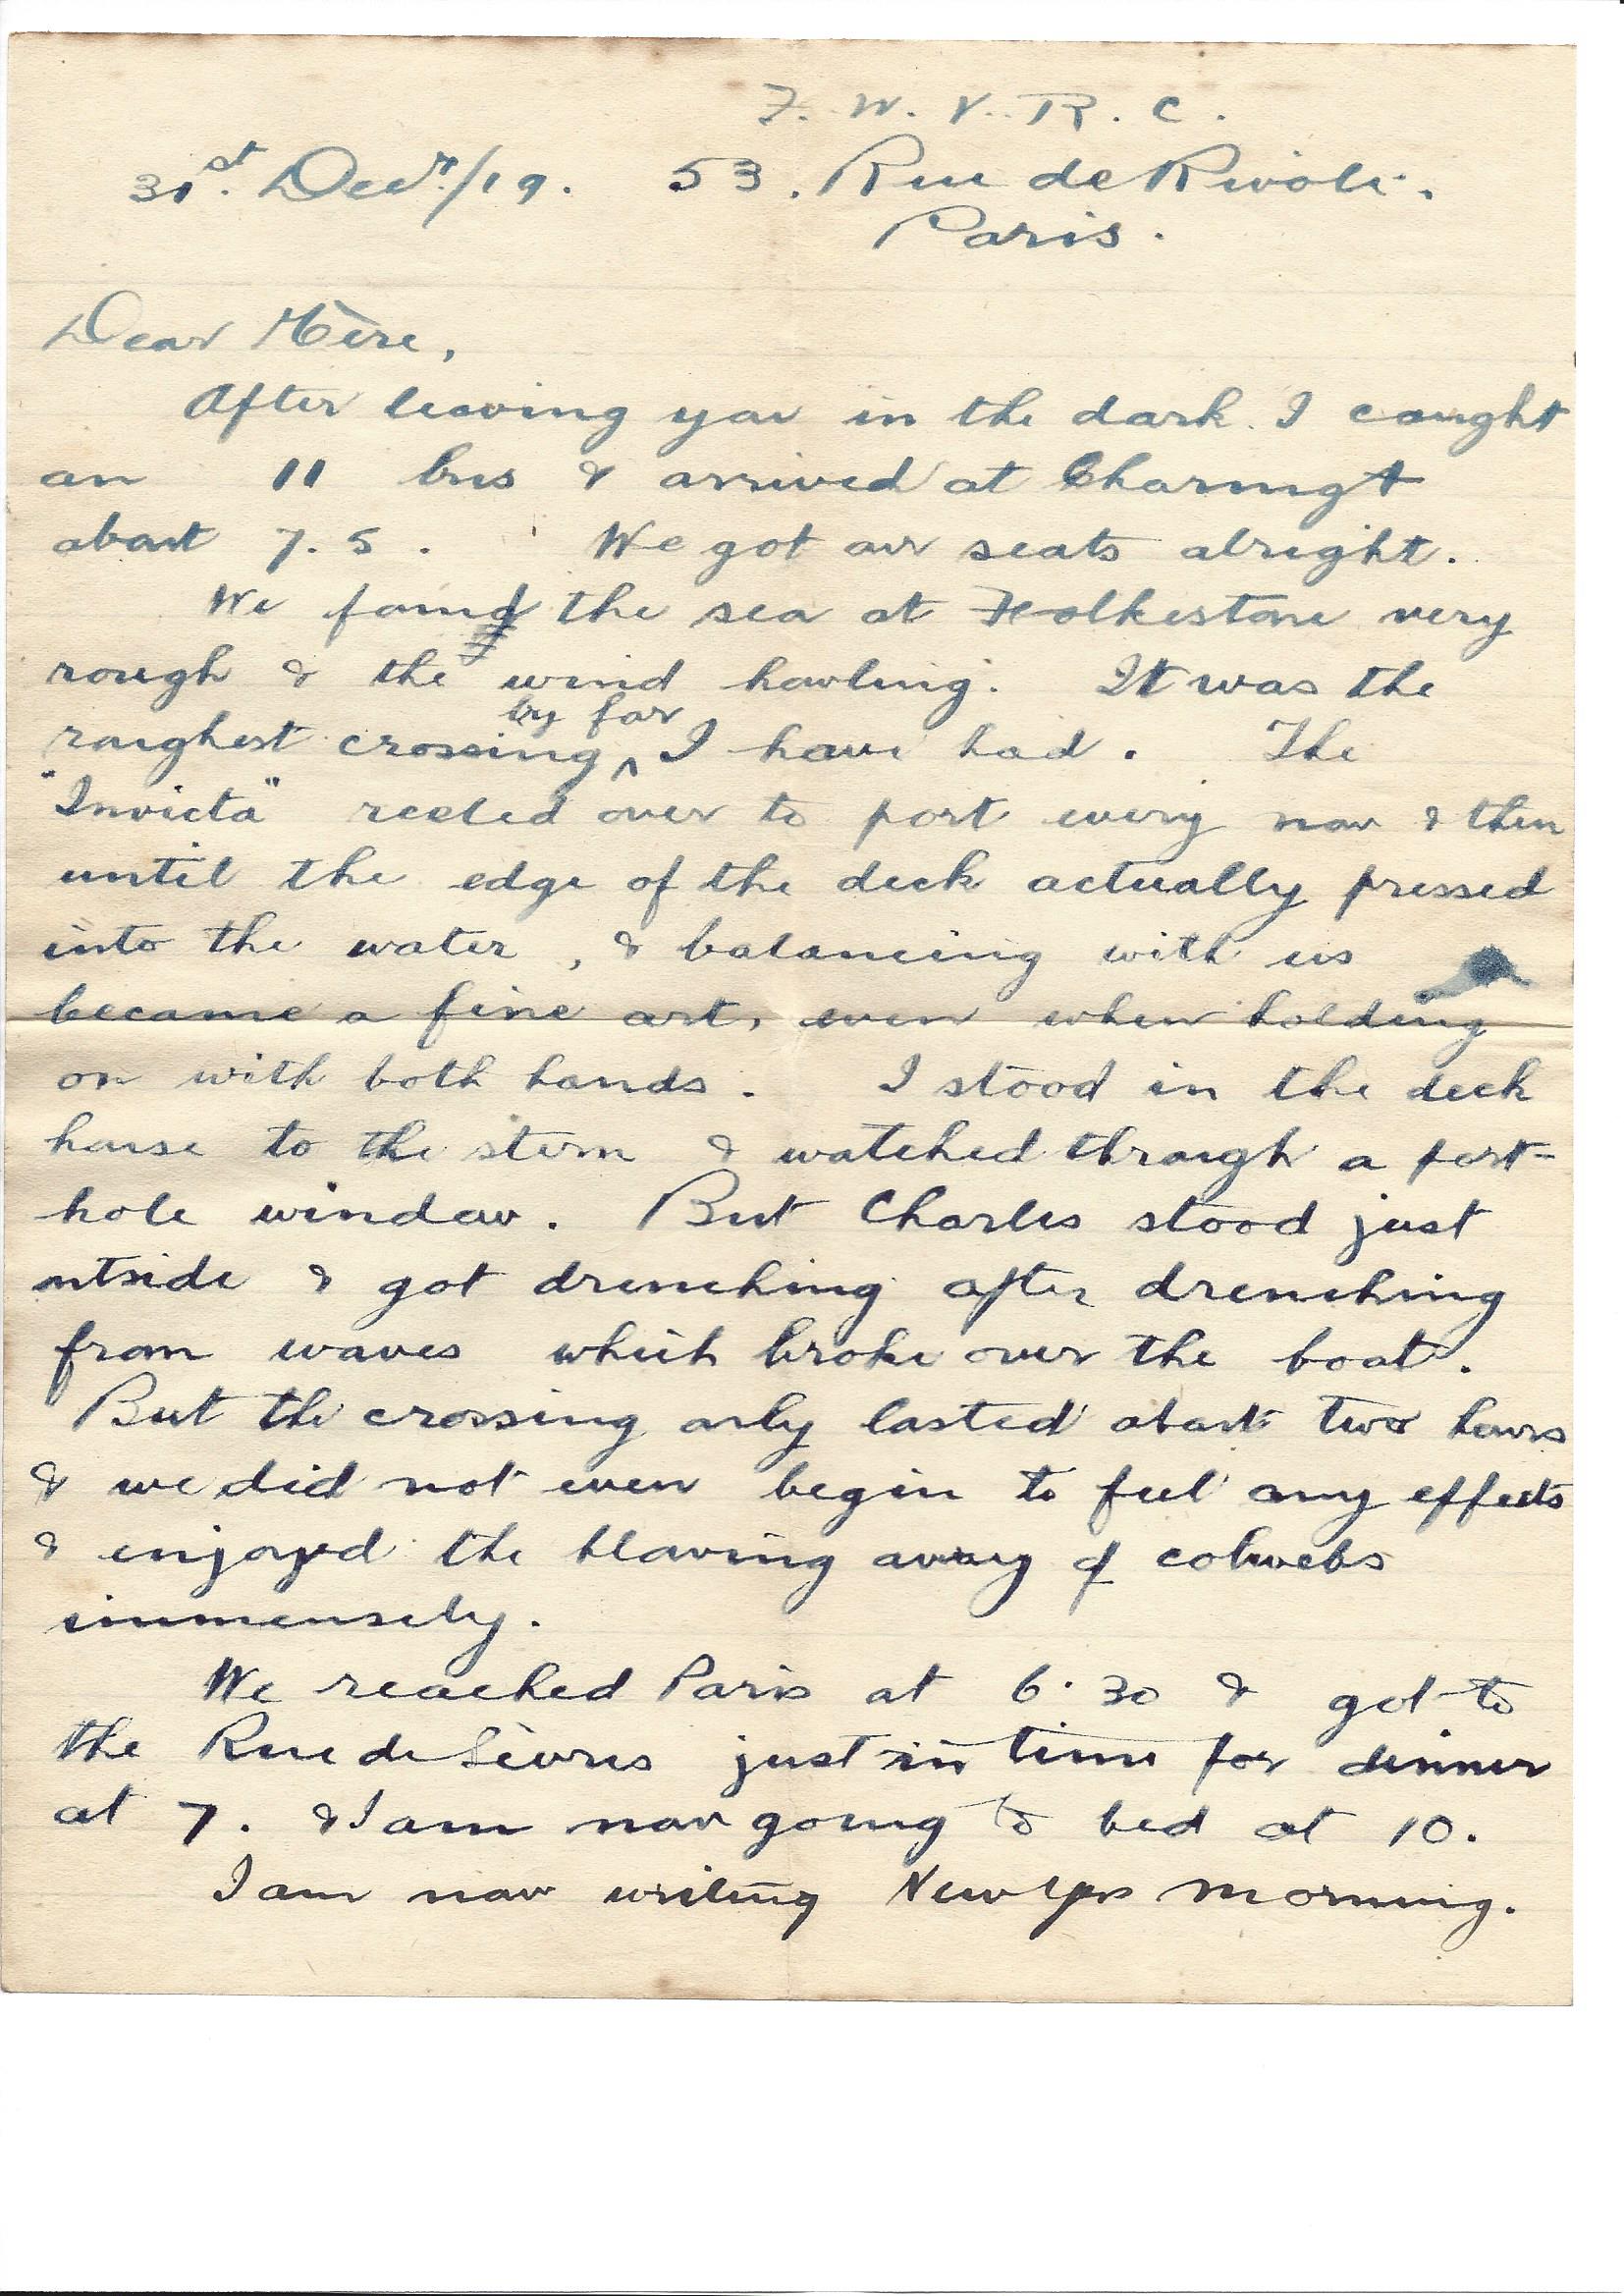 1919-12-31 page 2 letter by Donald Bearman